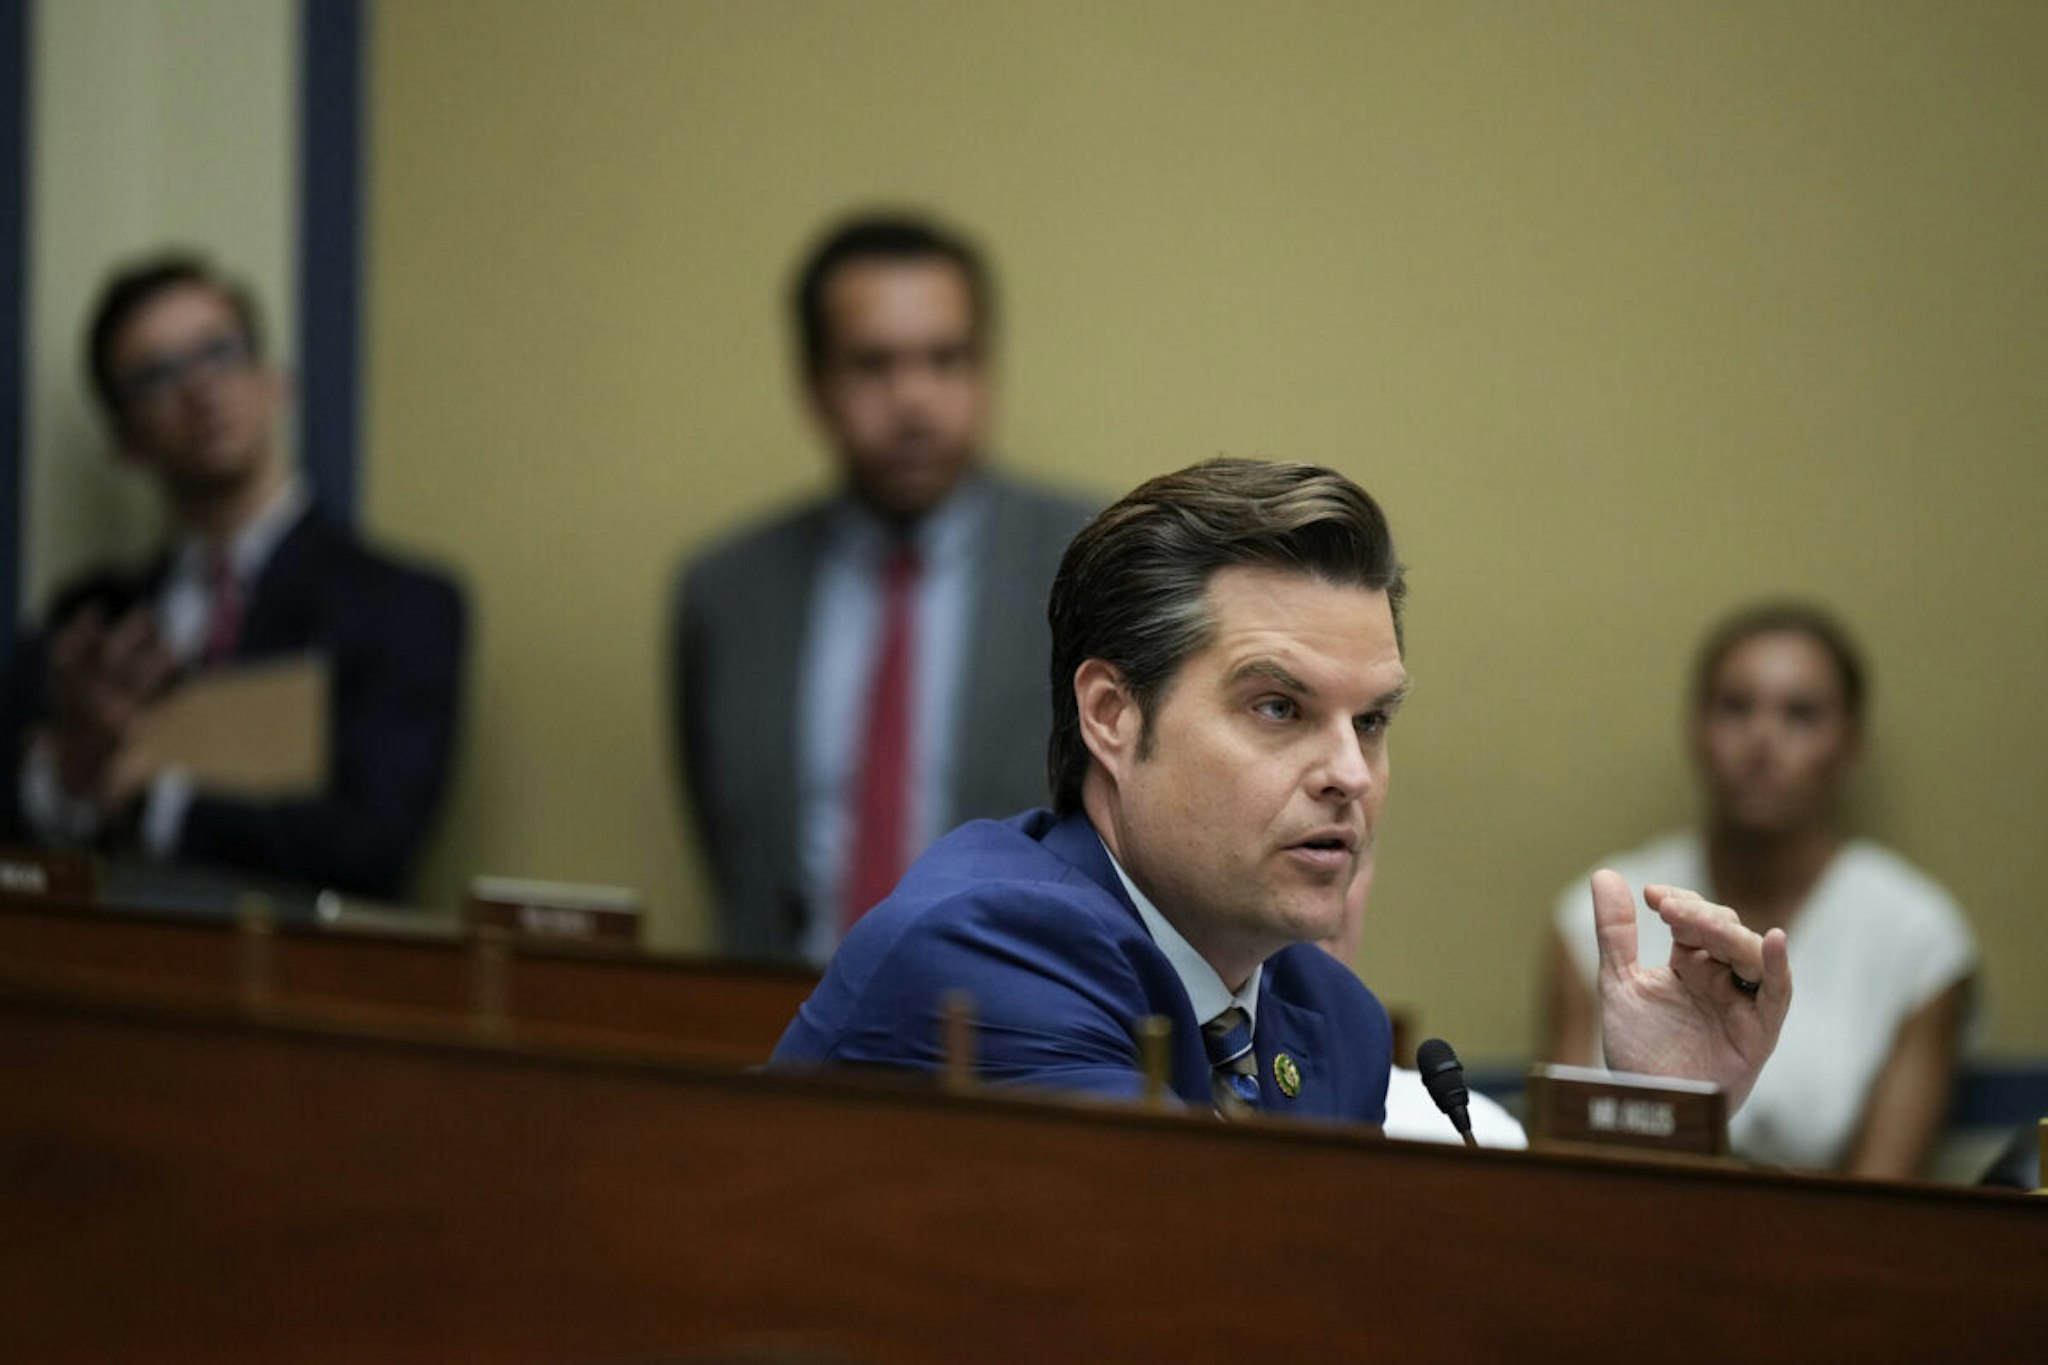 ep. Matt Gaetz (R-FL) speaks during a House Oversight Committee hearing titled "Unidentified Anomalous Phenomena: Implications on National Security, Public Safety, and Government Transparency" on Capitol Hill 26, 2023 in Washington, DC.